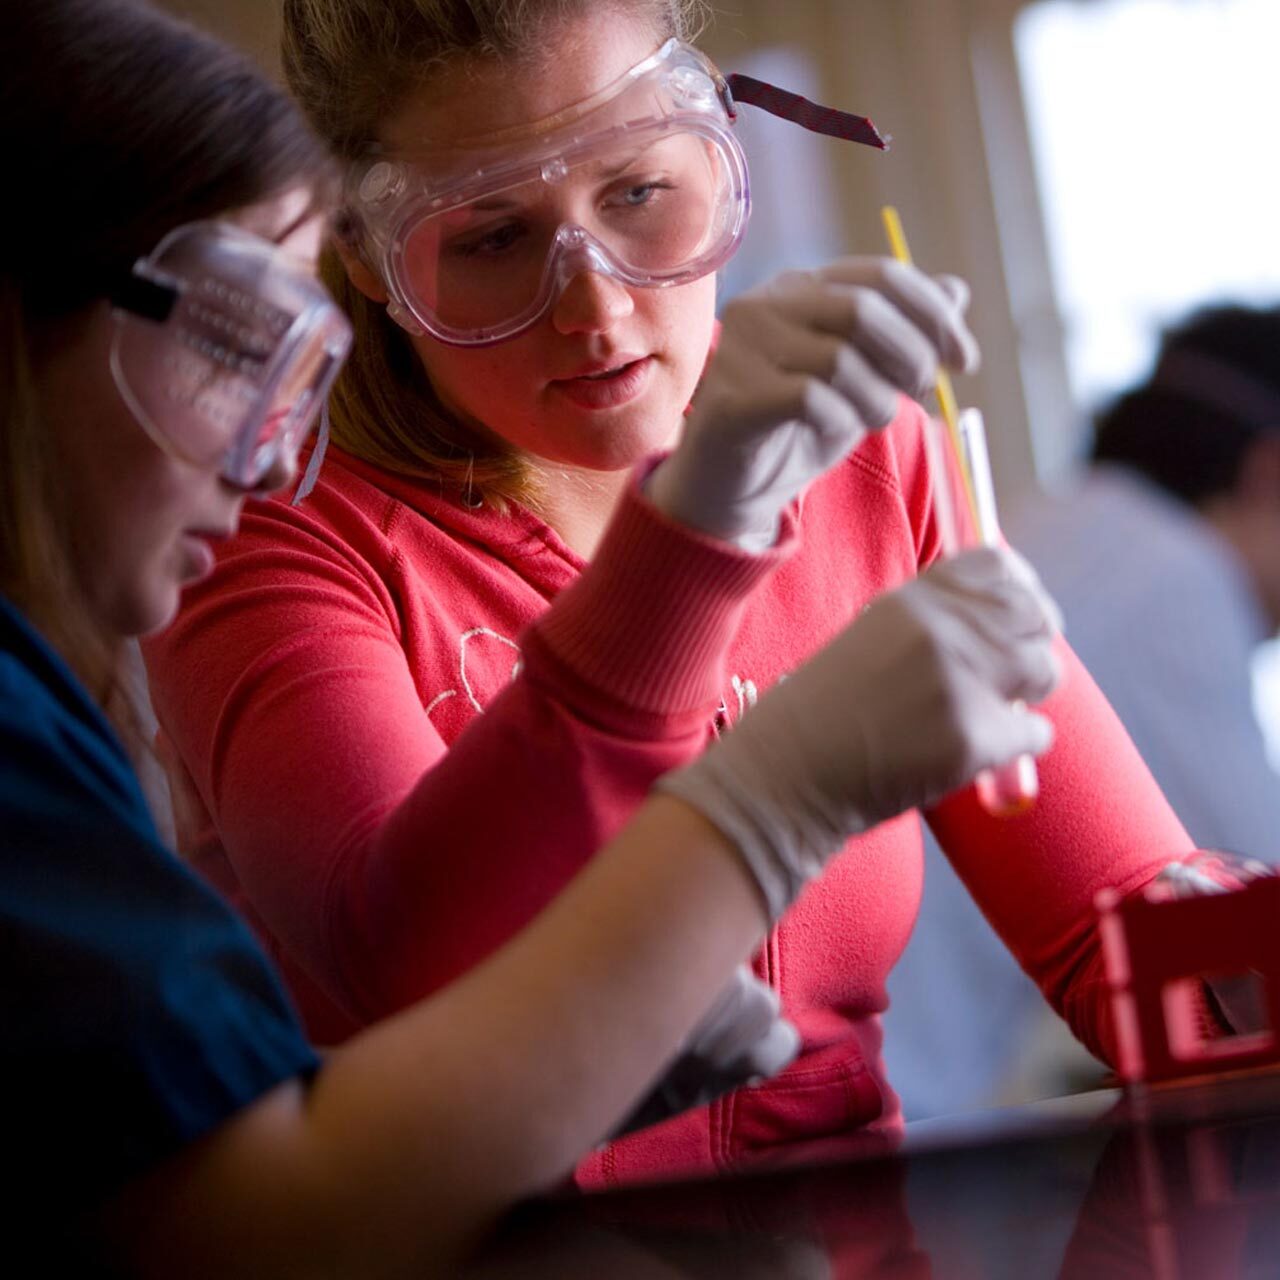 students in a science lab